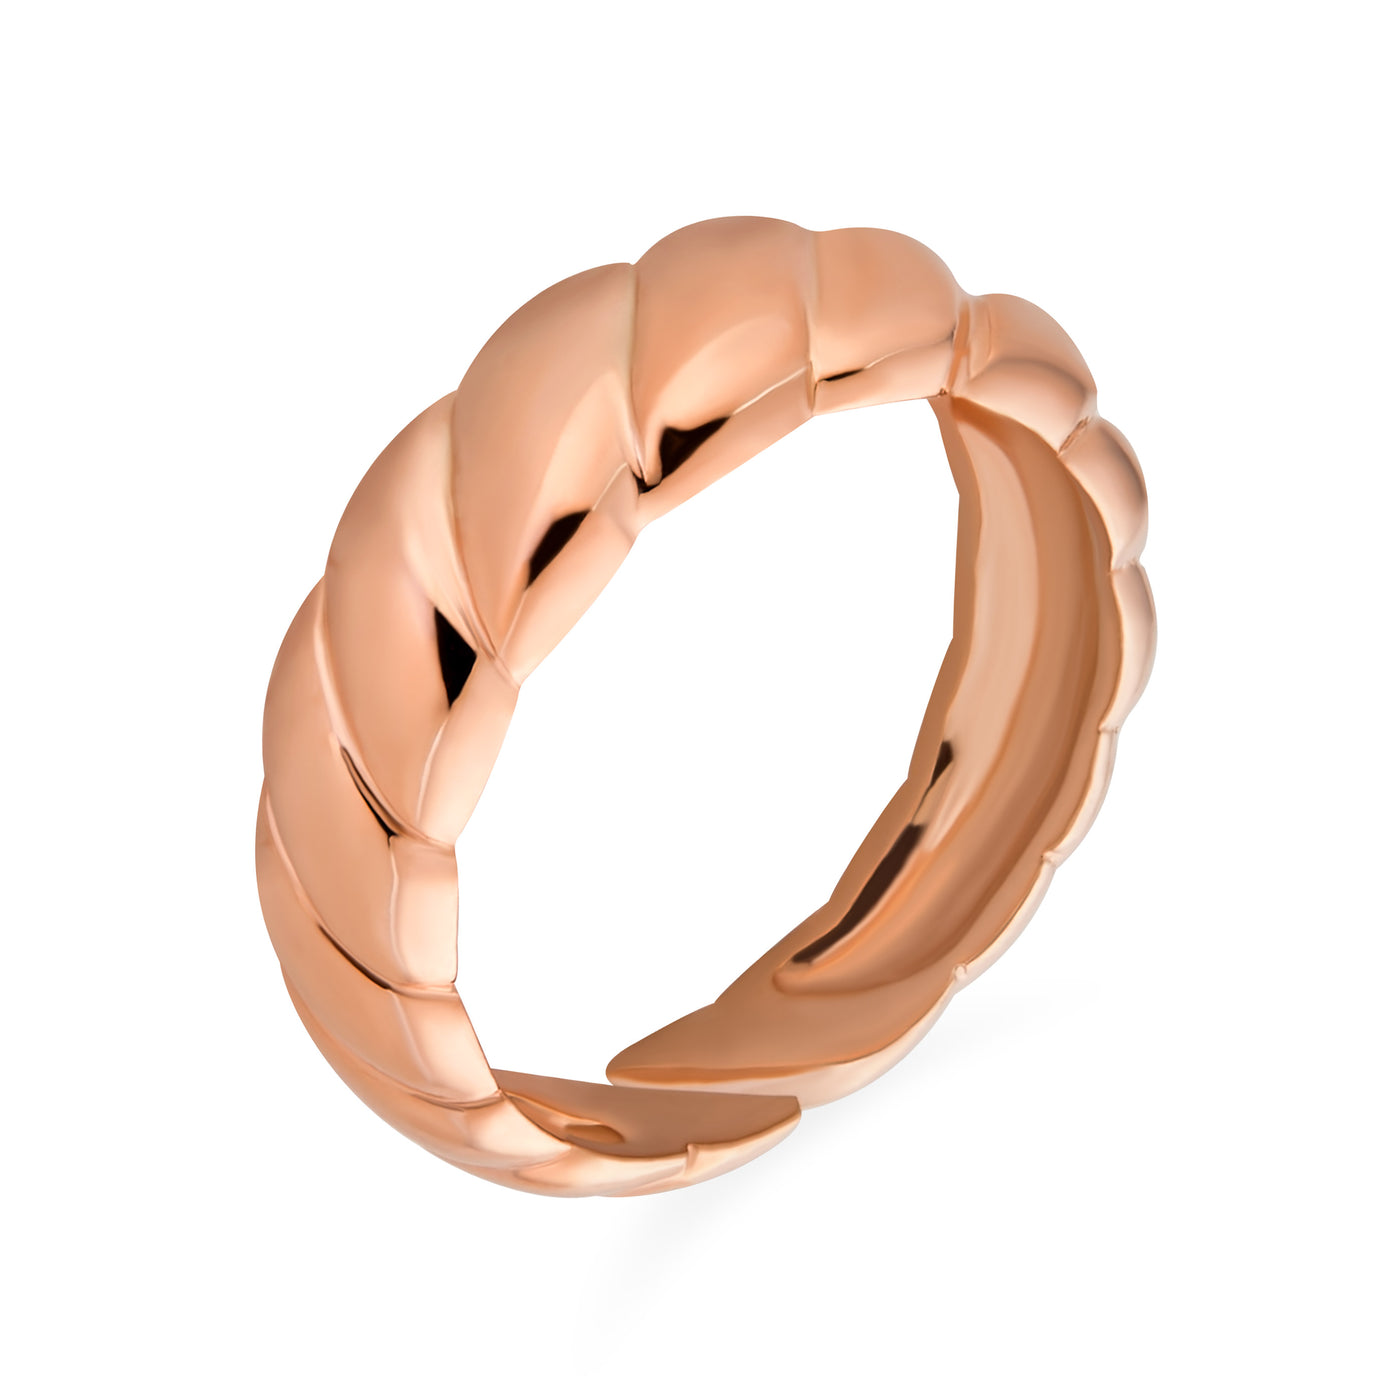 Shrimp Croissant Stacking Ring Band Rose Gold Plated .925 Silver